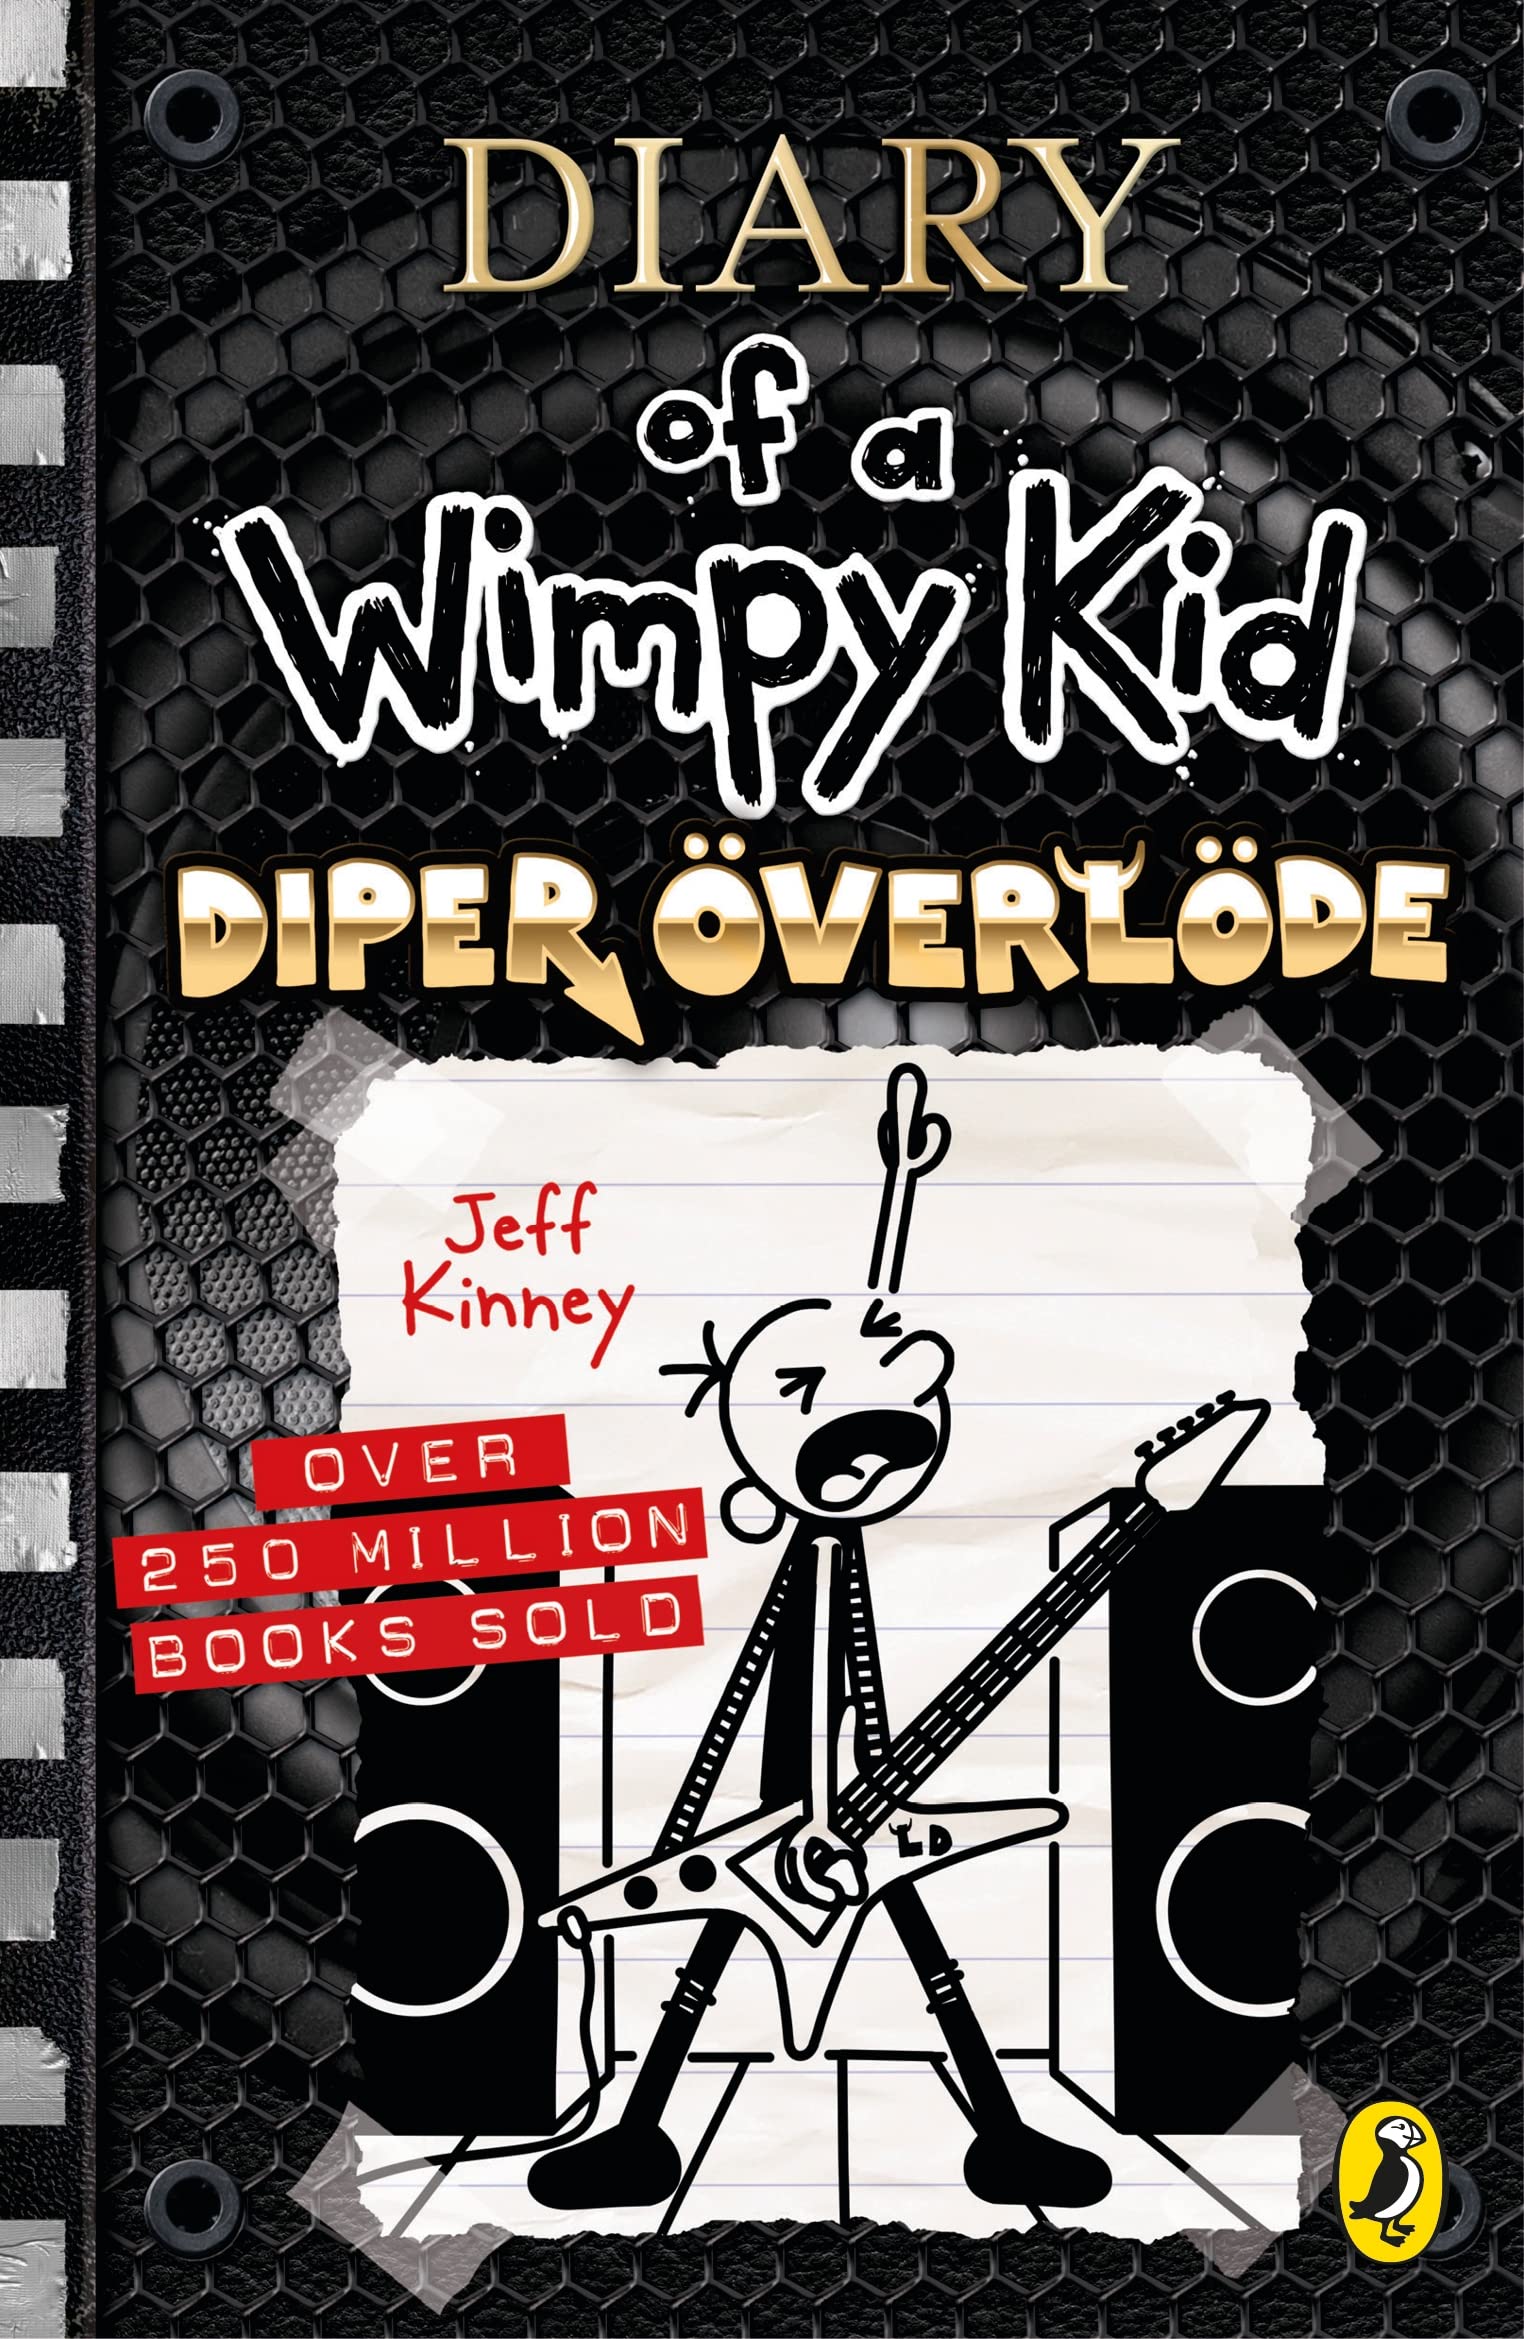 SCORE the brand-new Diary of a Wimpy Kid Book, BIG SHOT! 